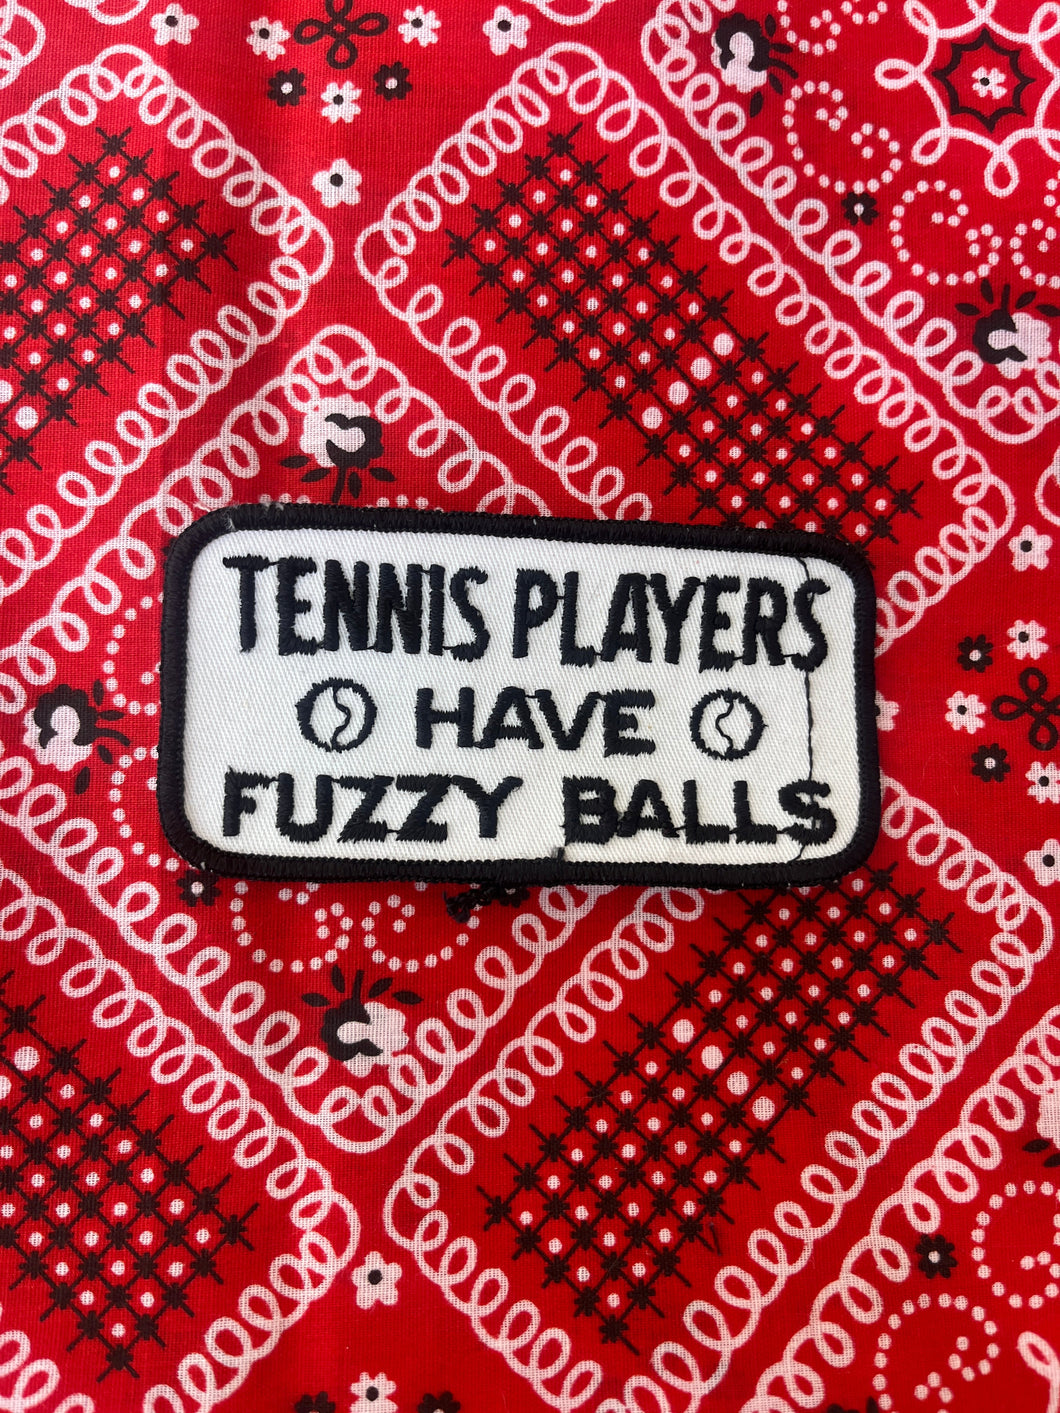 Tennis Players Have Fuzzy Balls Patch